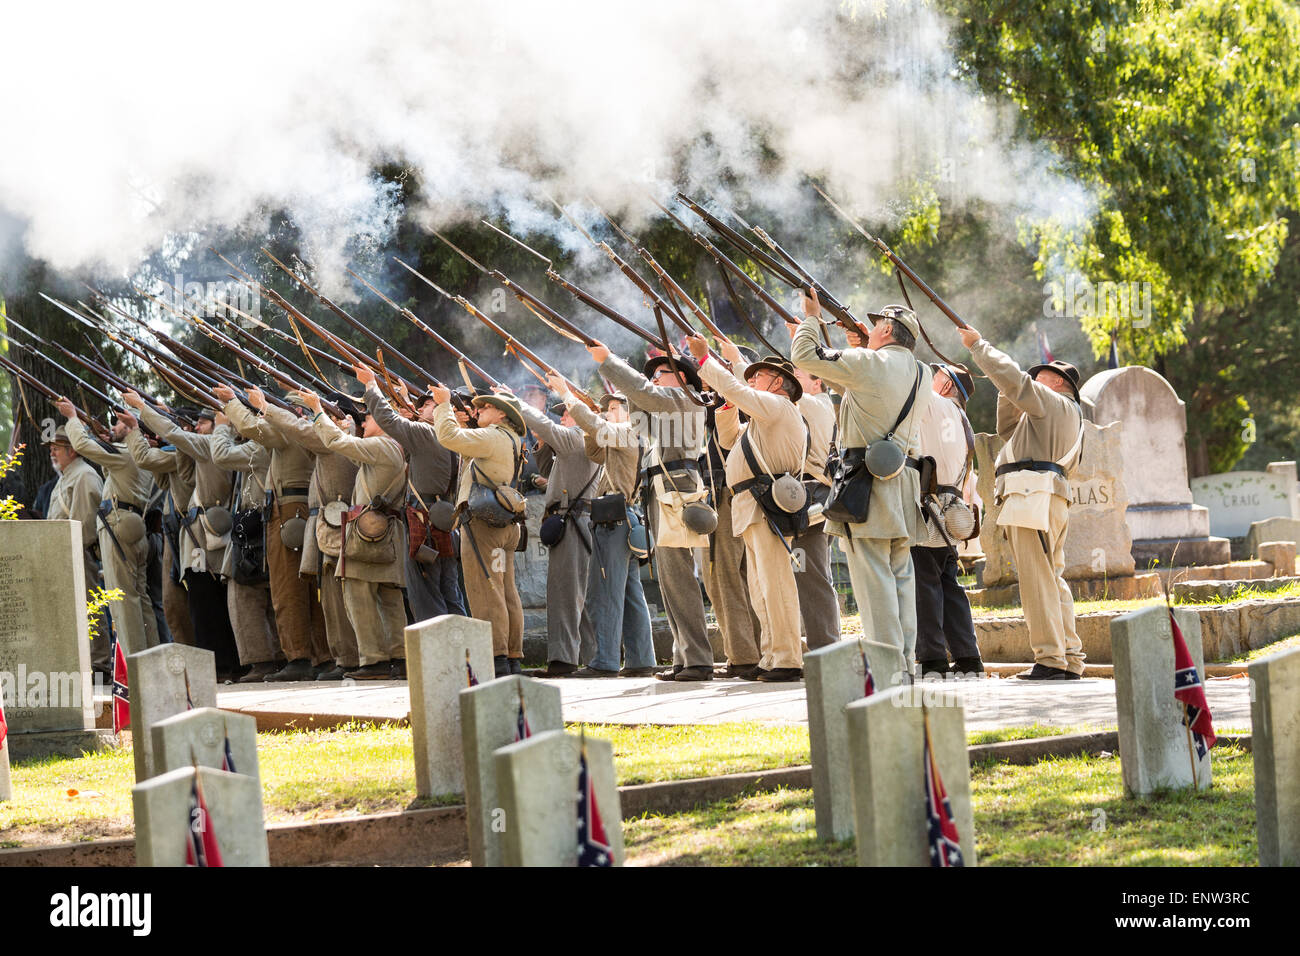 Civil war re-enactors in period costume fire their rifles in honor during a service at Elmwood Cemetery to mark Confederate Memorial Day May 2, 2015 in Columbia, SC. Confederate Memorial Day is an official state holiday in South Carolina and honors those that served during the Civil War. Stock Photo